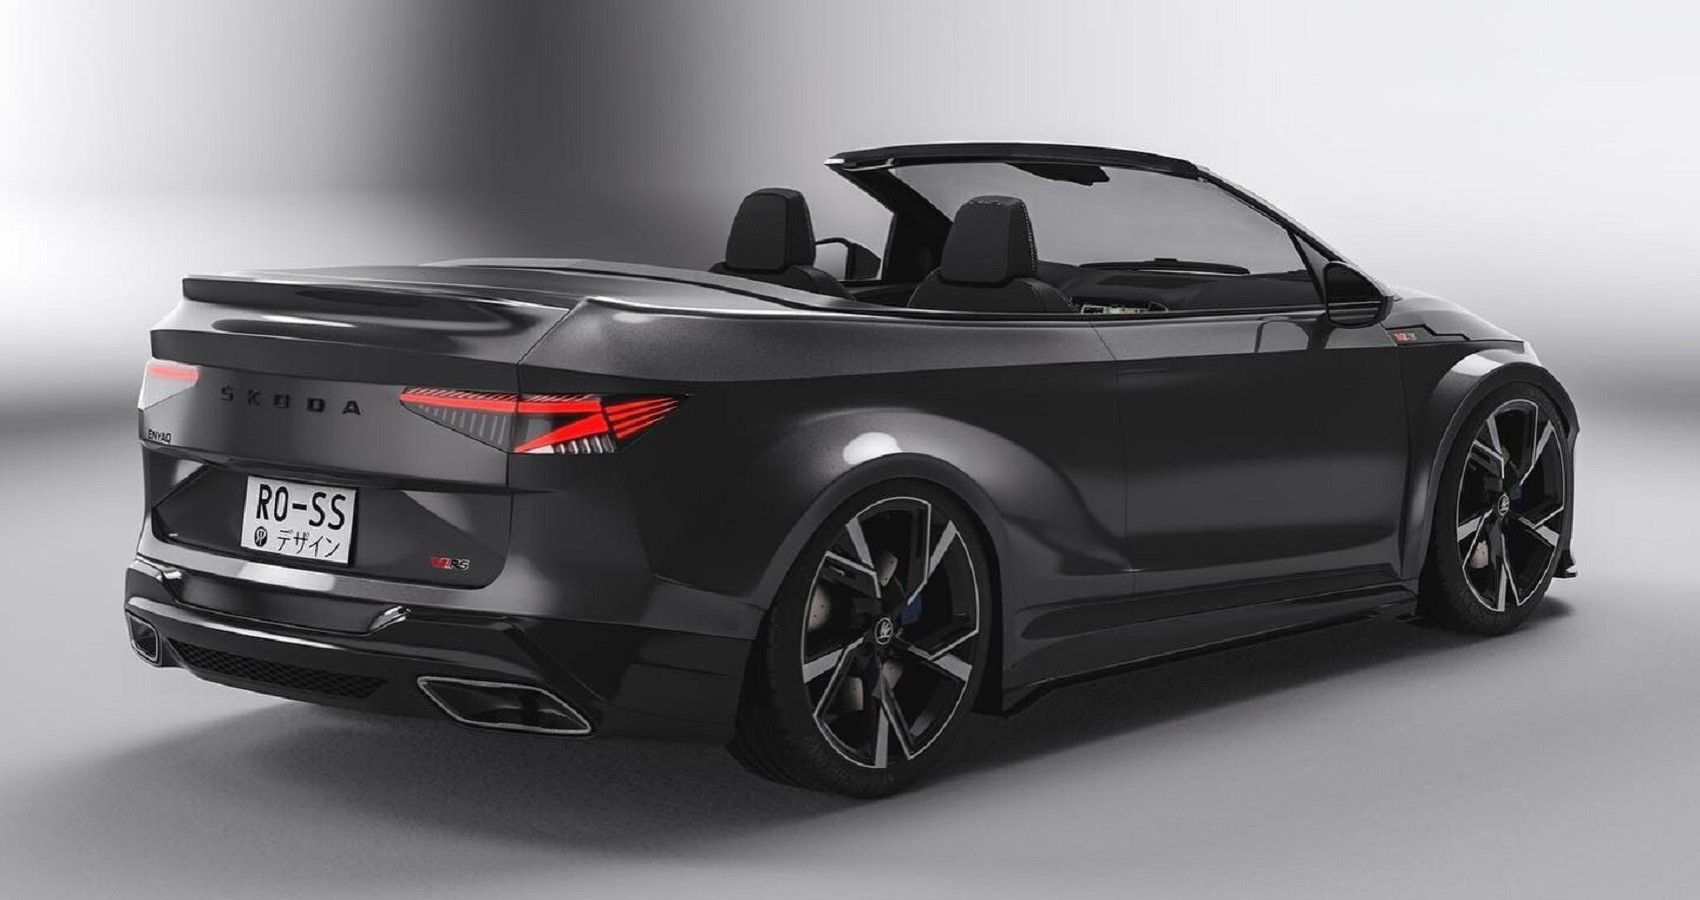 This Render Wants To Convince Us That SUV Convertibles Can Be Cool